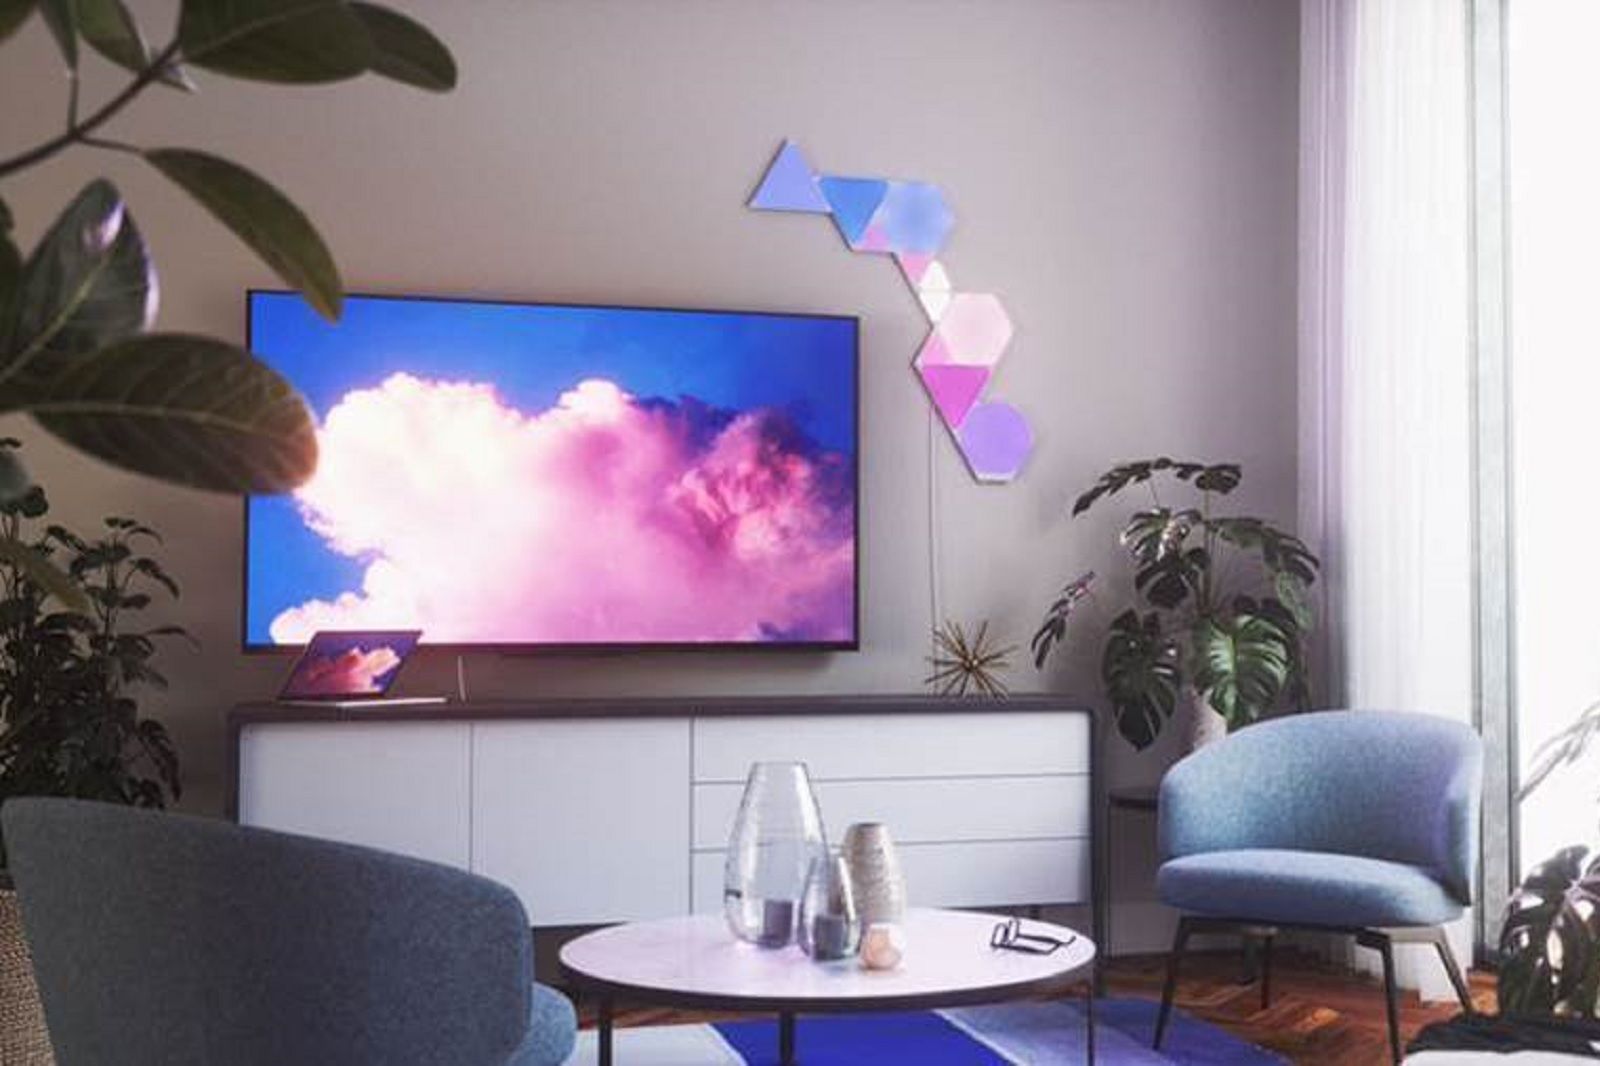 Nanoleaf now comes with even more shapes - triangles and mini triangles photo 1